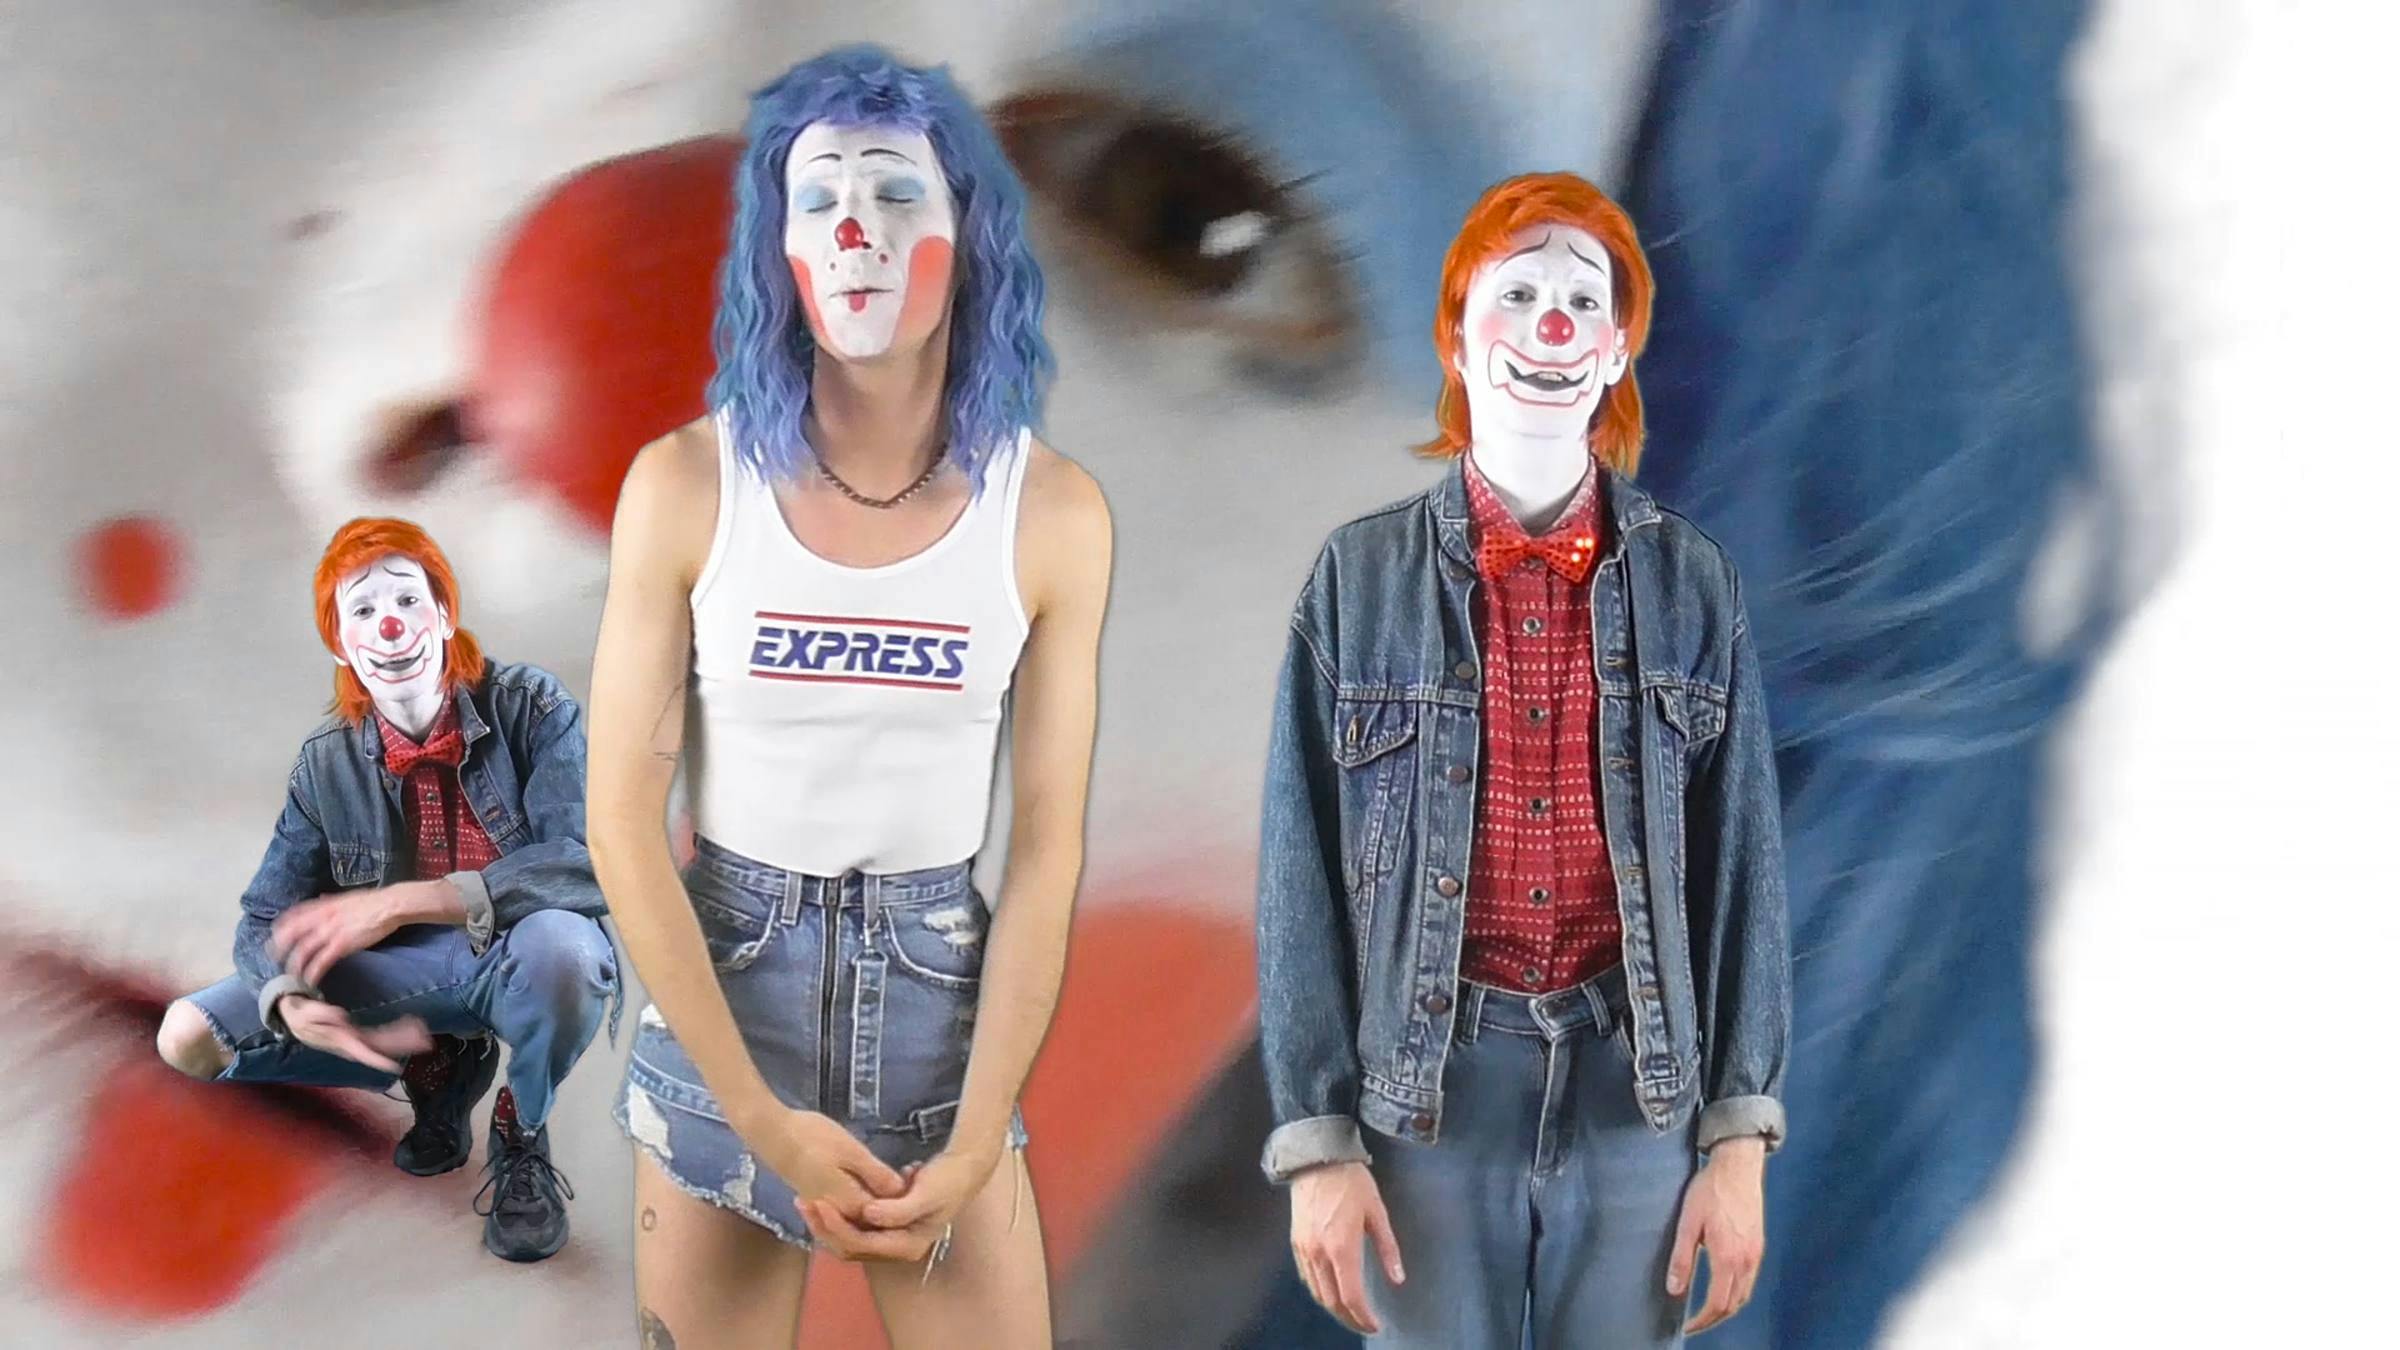 Image of three figures looking at the camera wearing clown-like make up. Two of the figures look the same. In the background is a blow up detail of one of their faces.